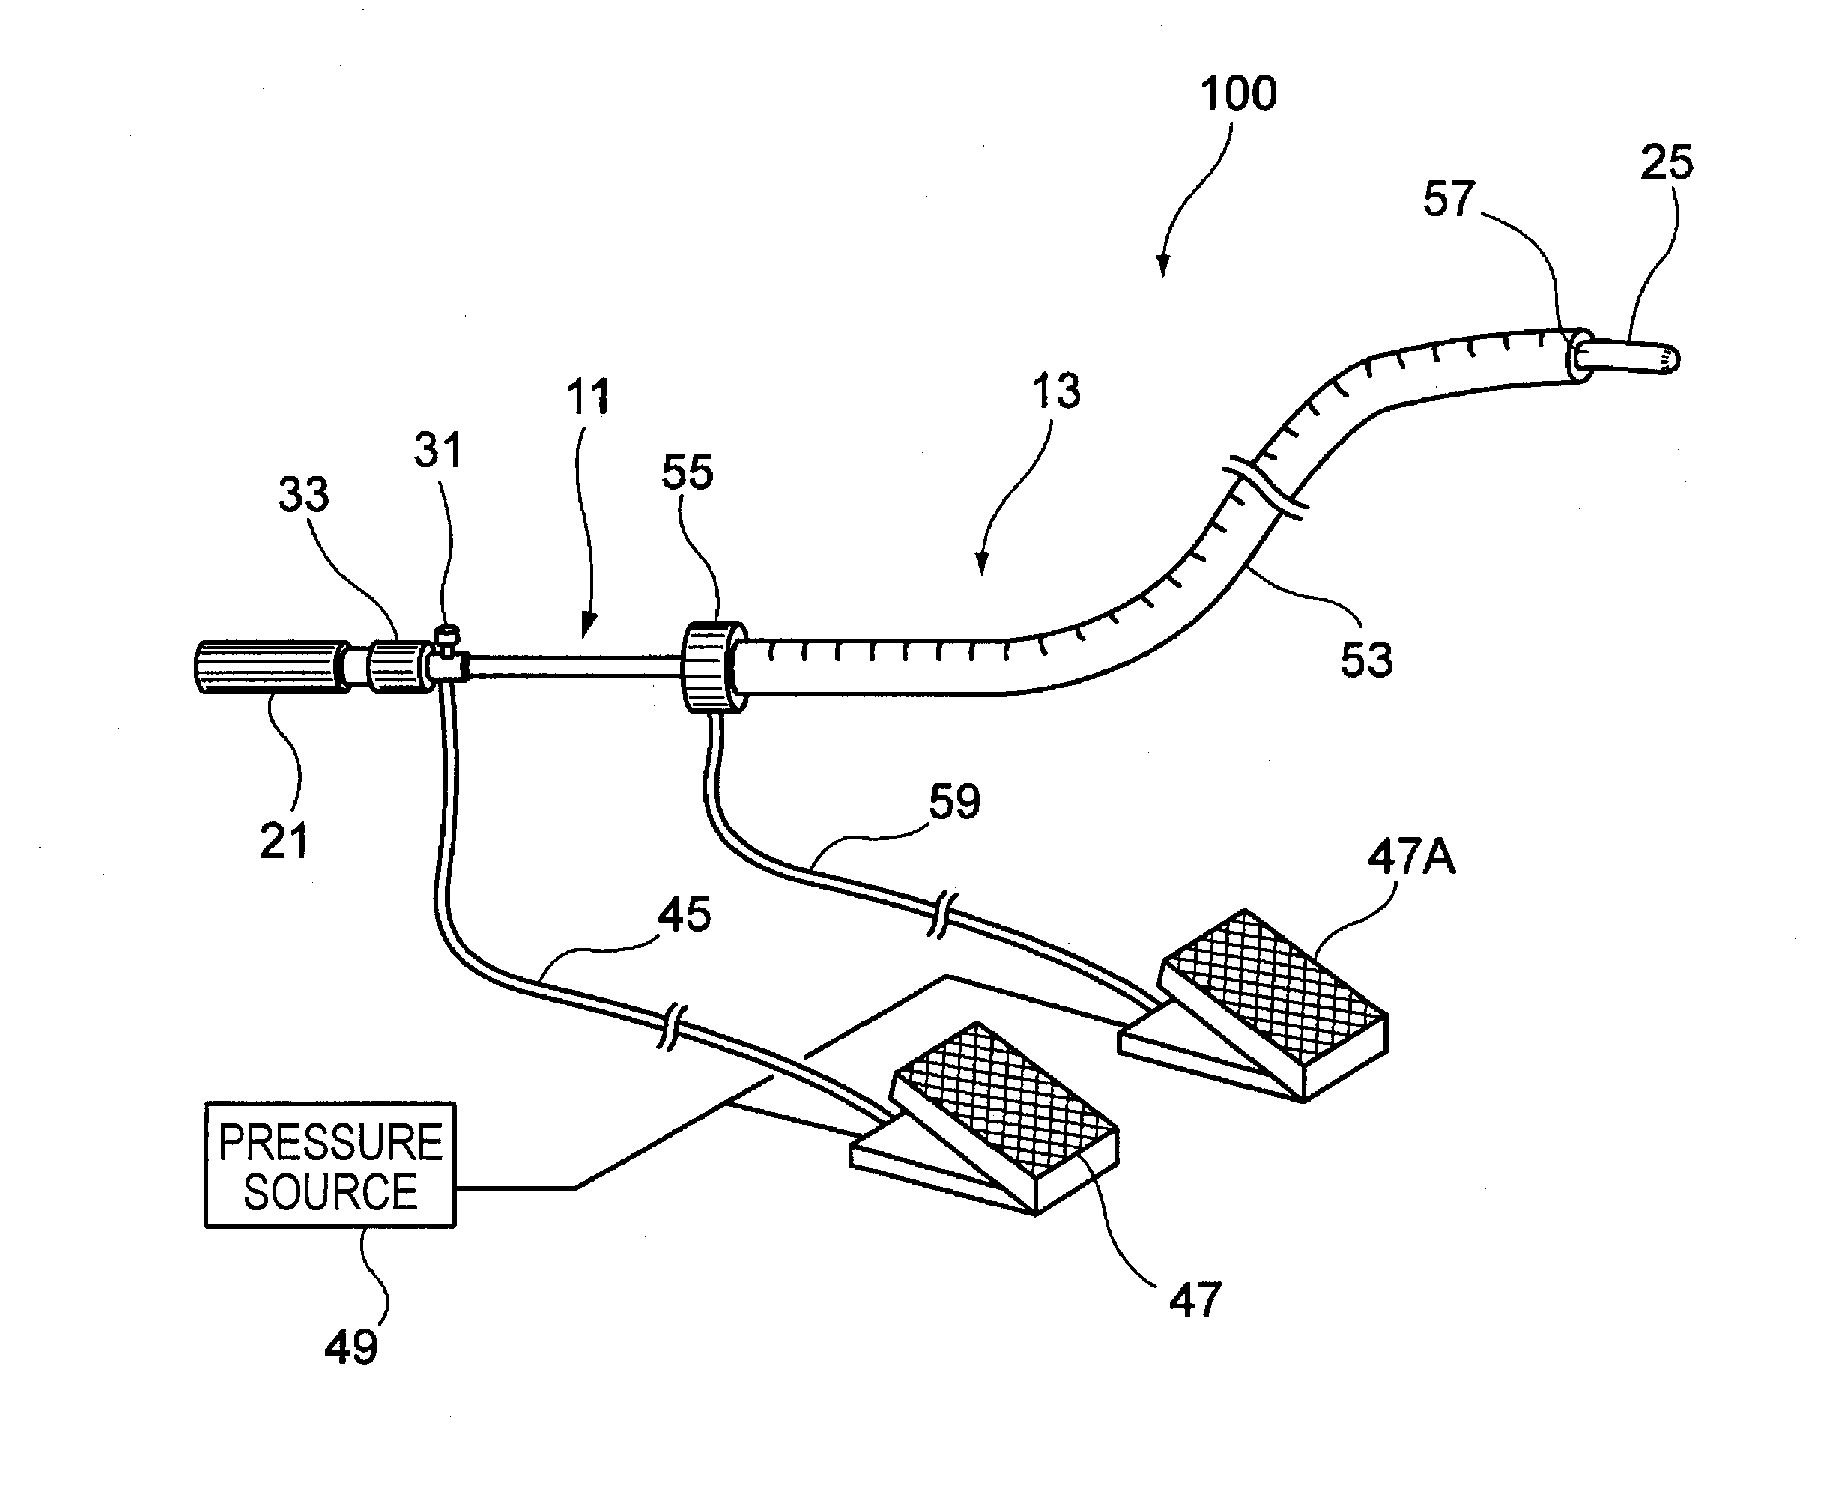 Bending-insertion assisting instrument and insertion path securing apparatus